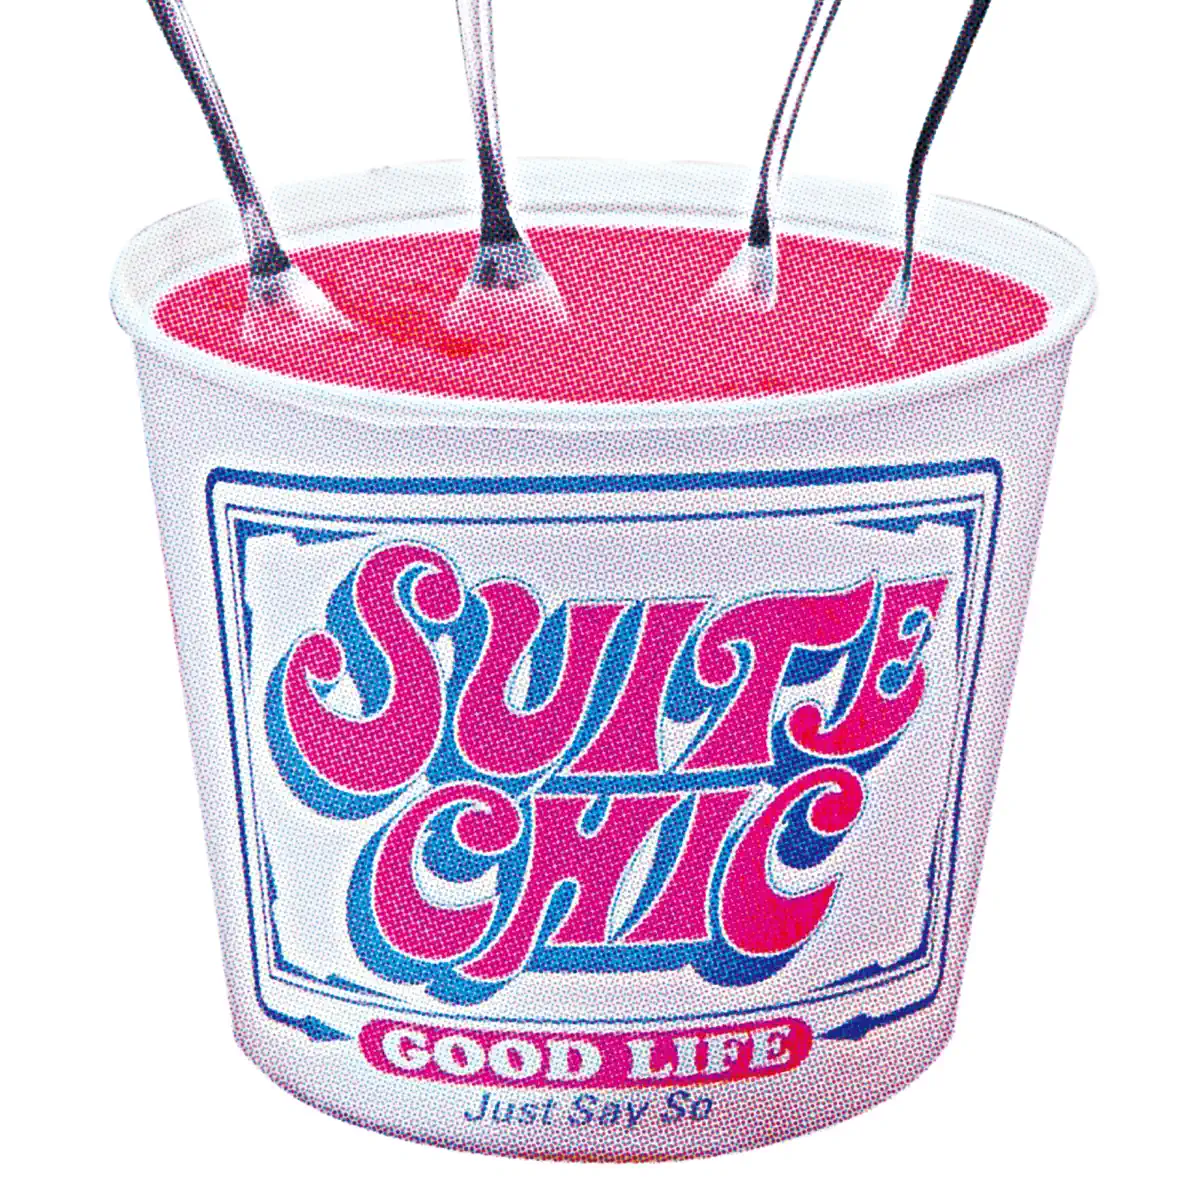 SUITE CHIC - GOOD LIFE /Just Say So - EP (2002) [iTunes Plus AAC M4A]-新房子